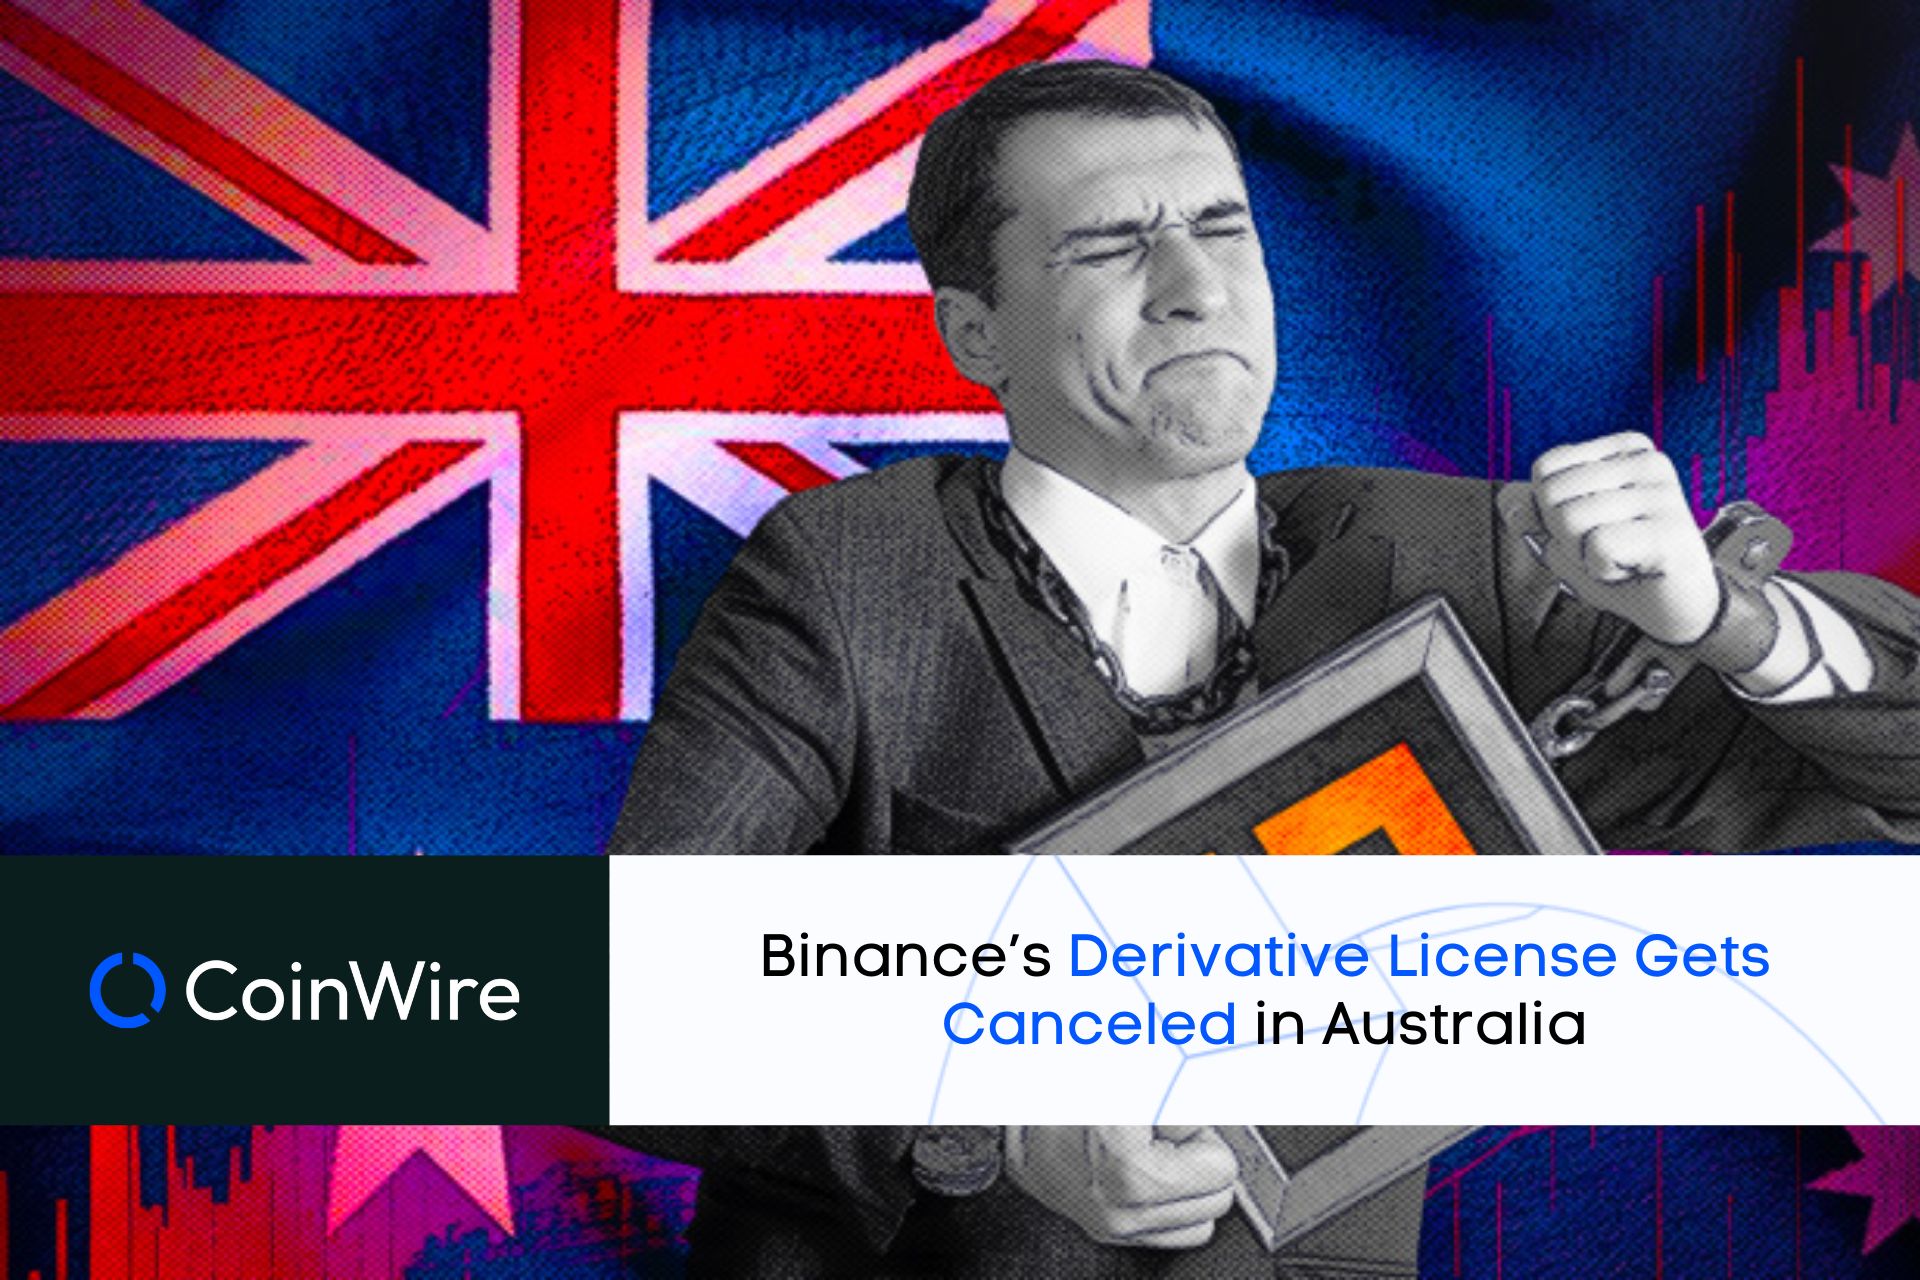 Binance’s Derivative License Is Canceled In Australia On April 14